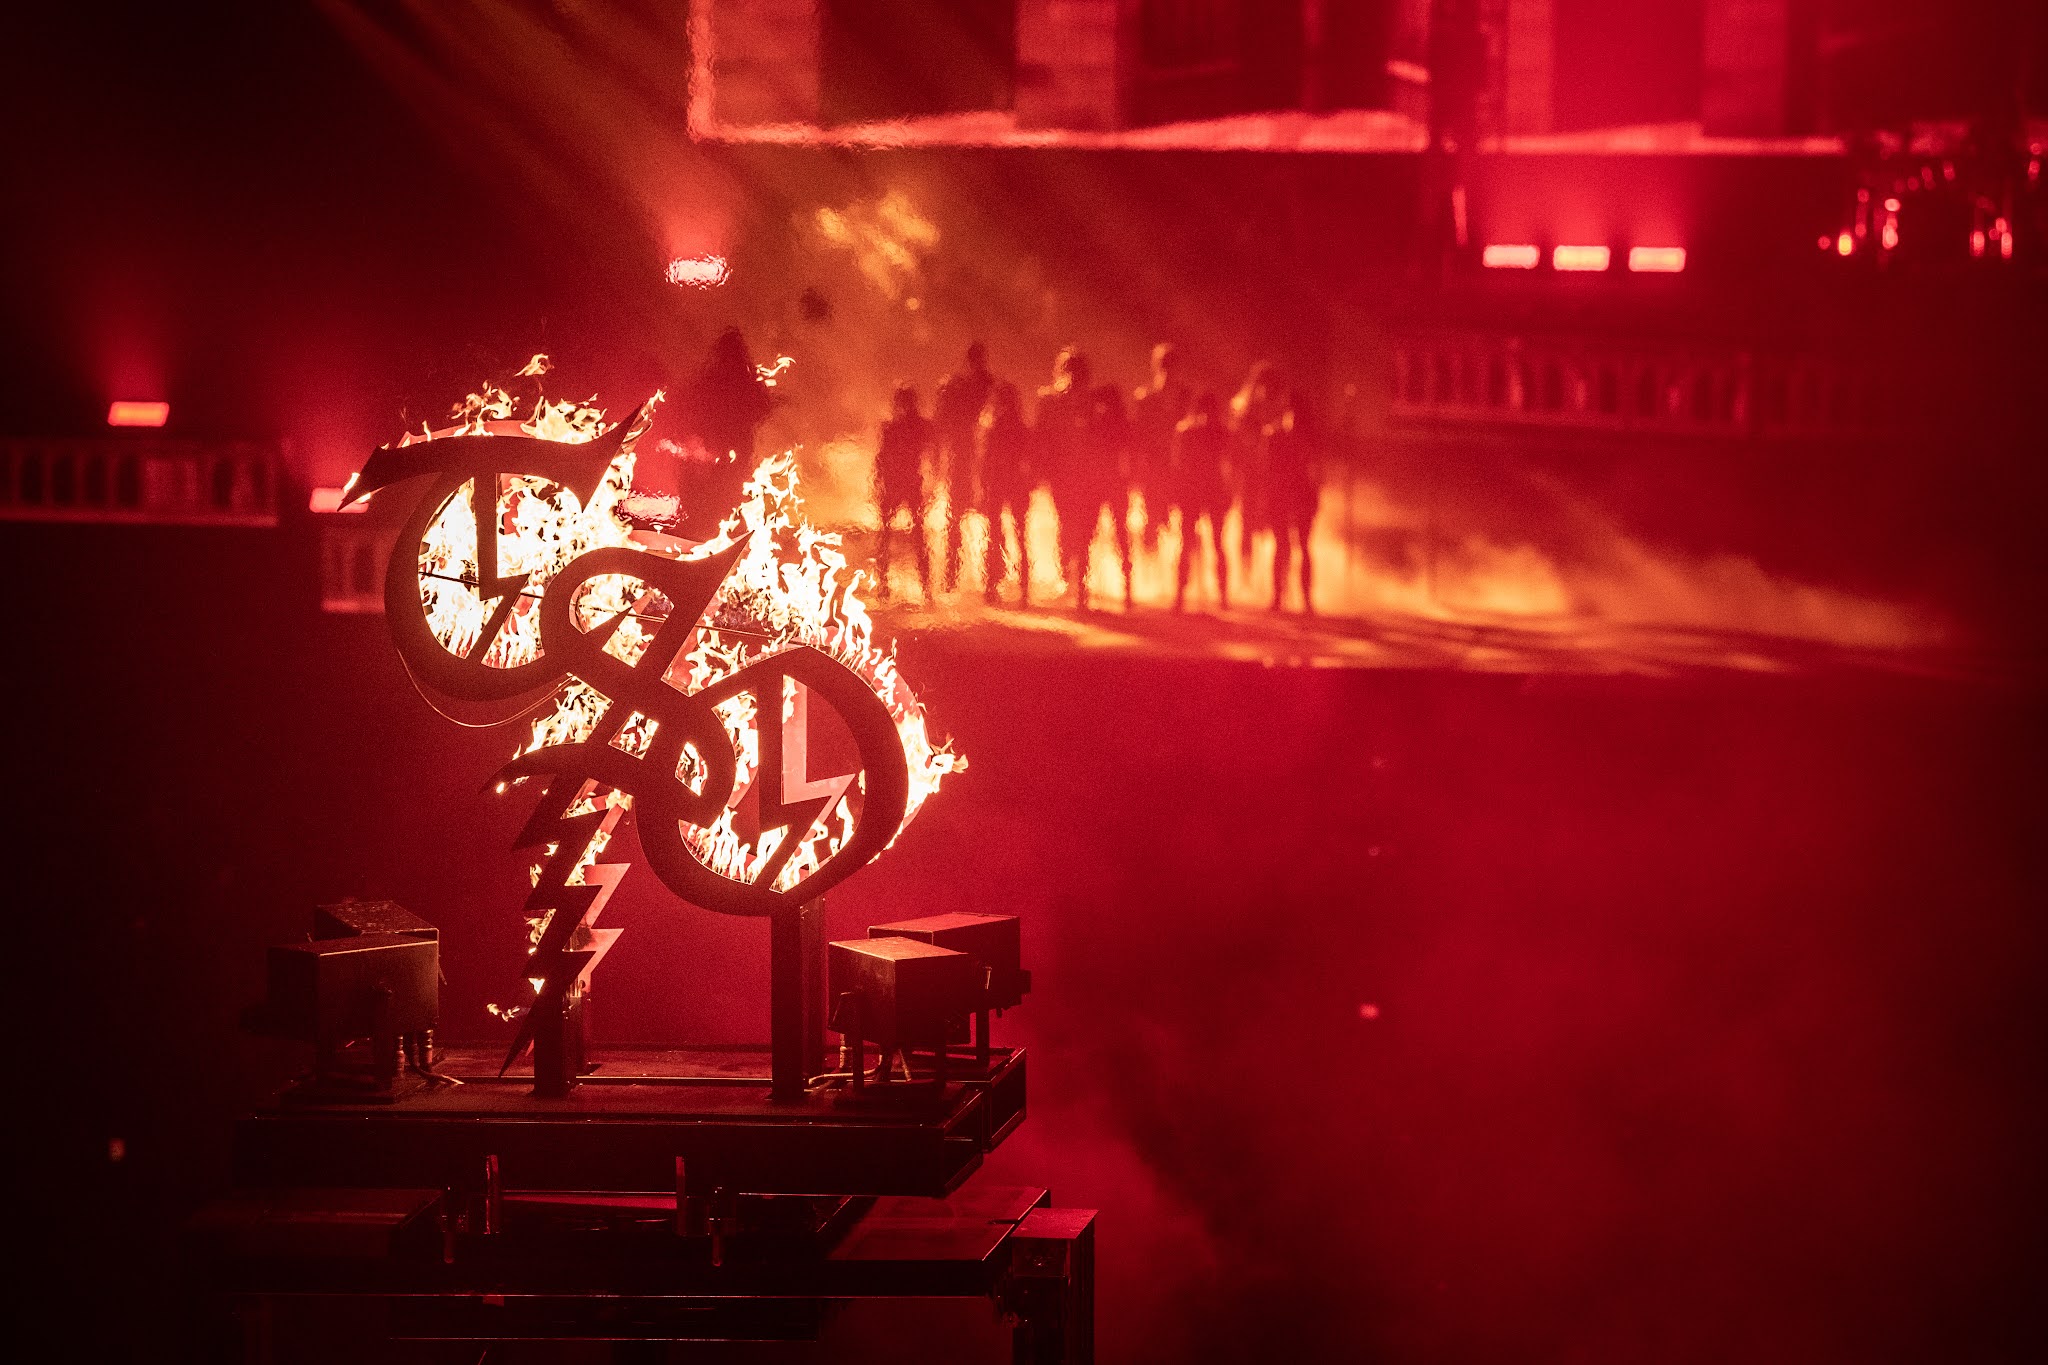 UPCOMING: Trans-Siberian Orchestra announces Winter Tour 2021